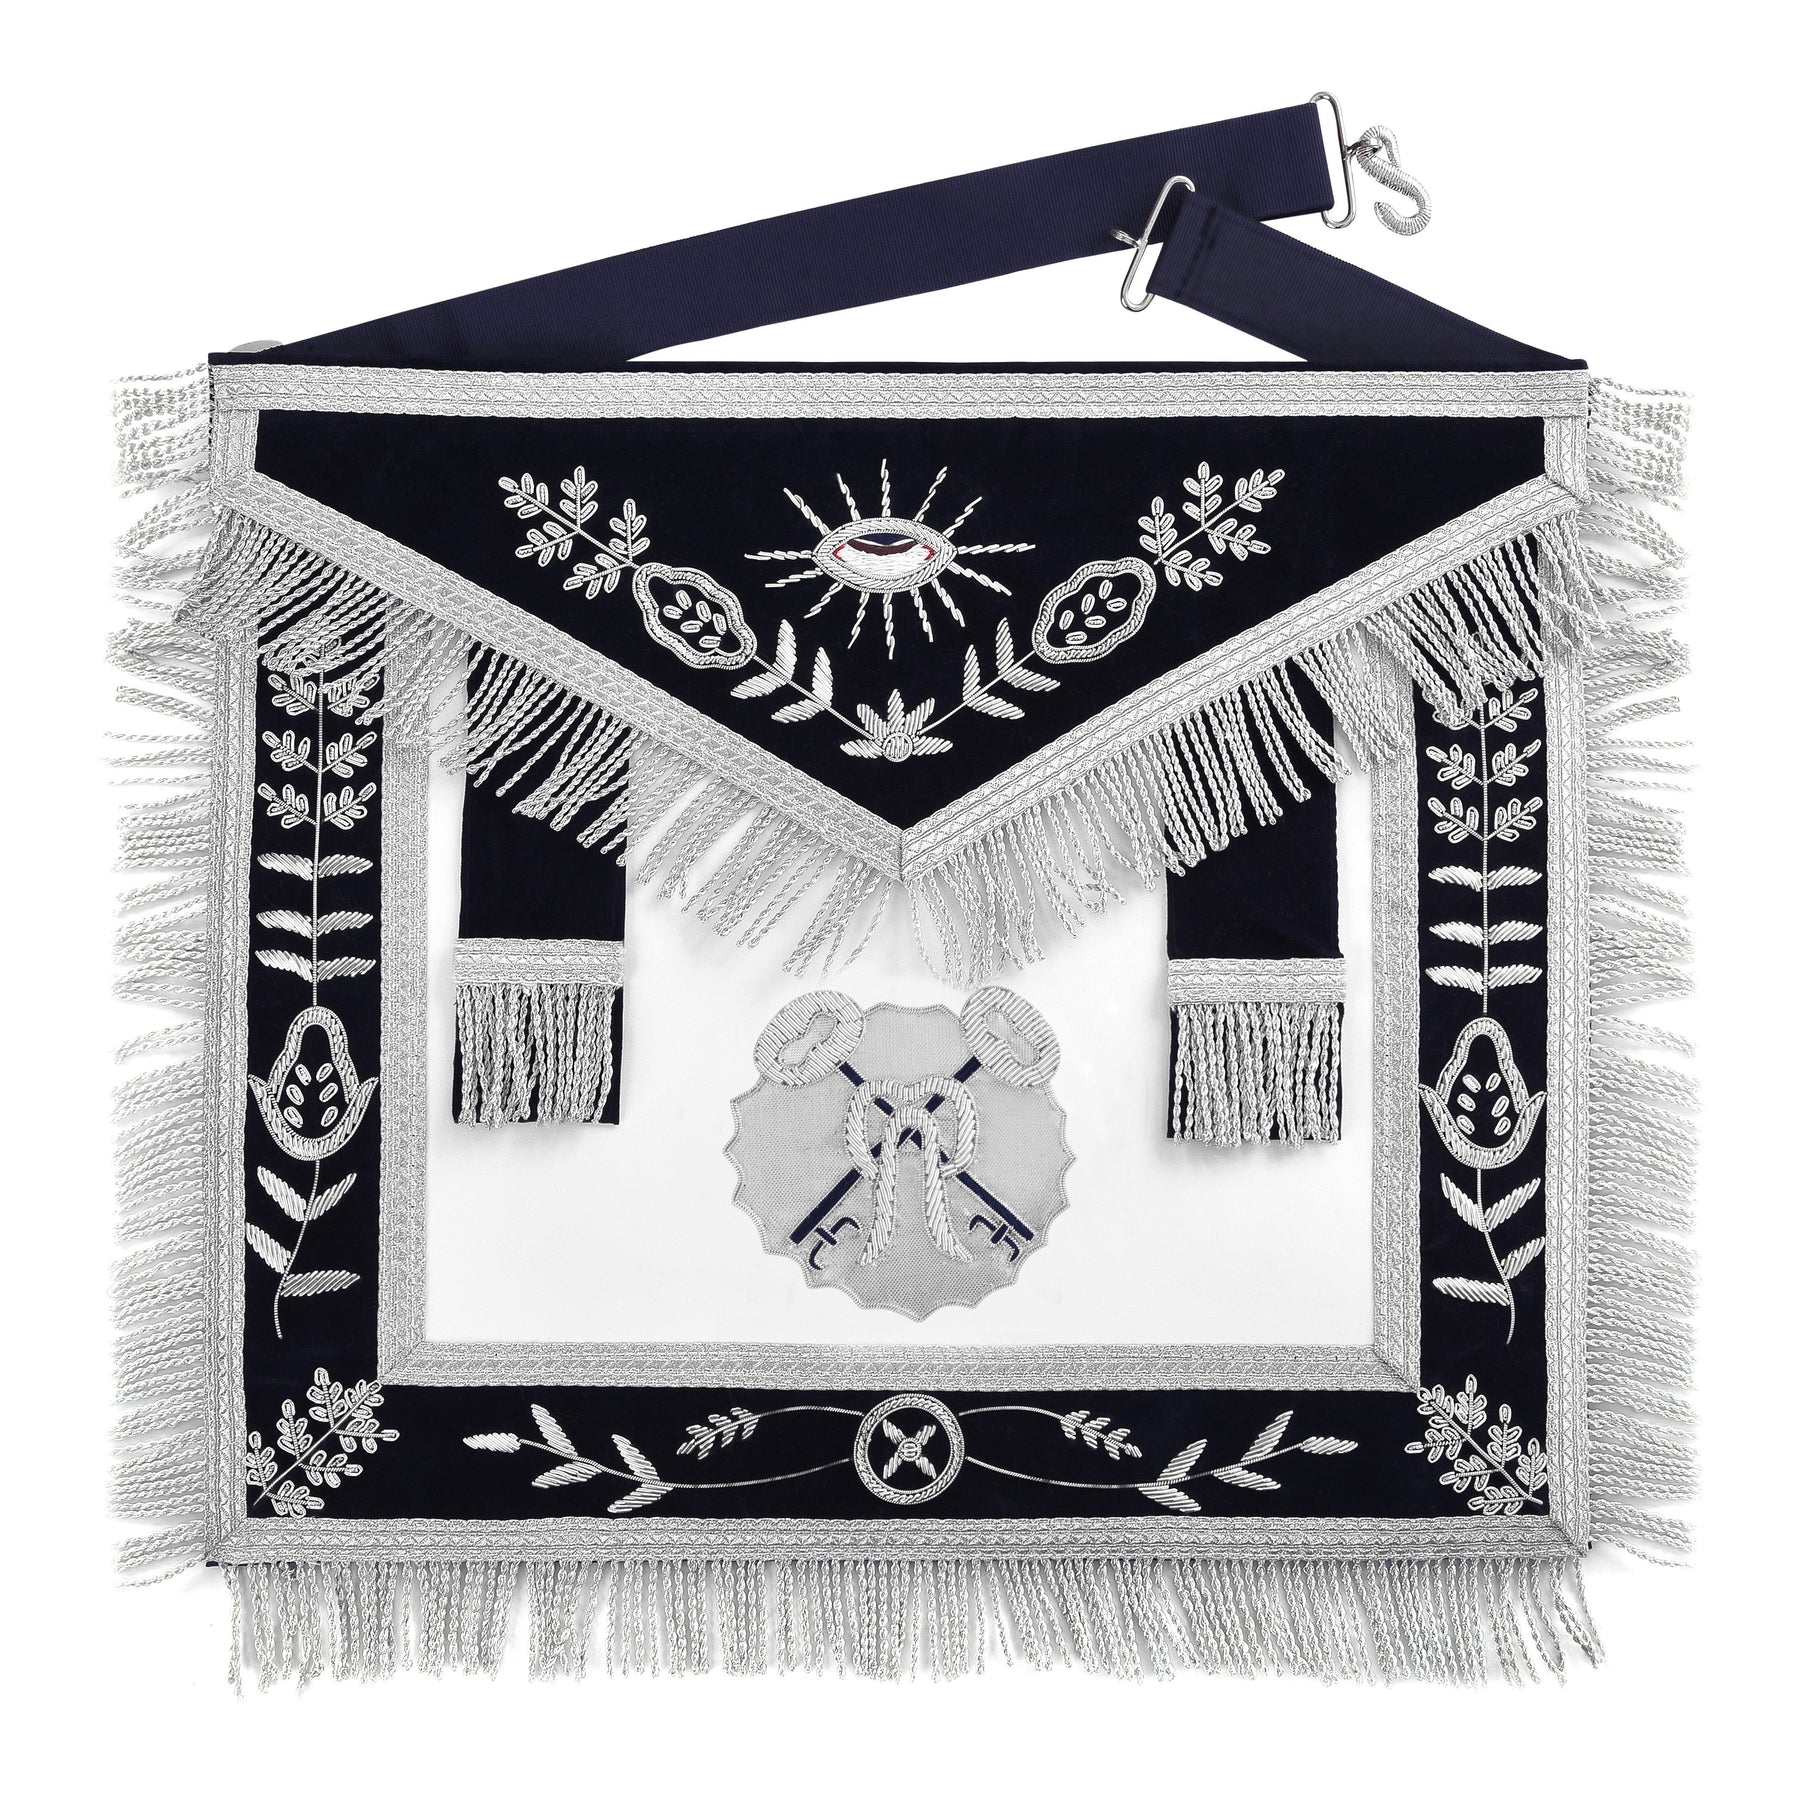 Treasurer Blue Lodge Officer Apron - Dark Blue With Silver Hand Embroidery Bullion